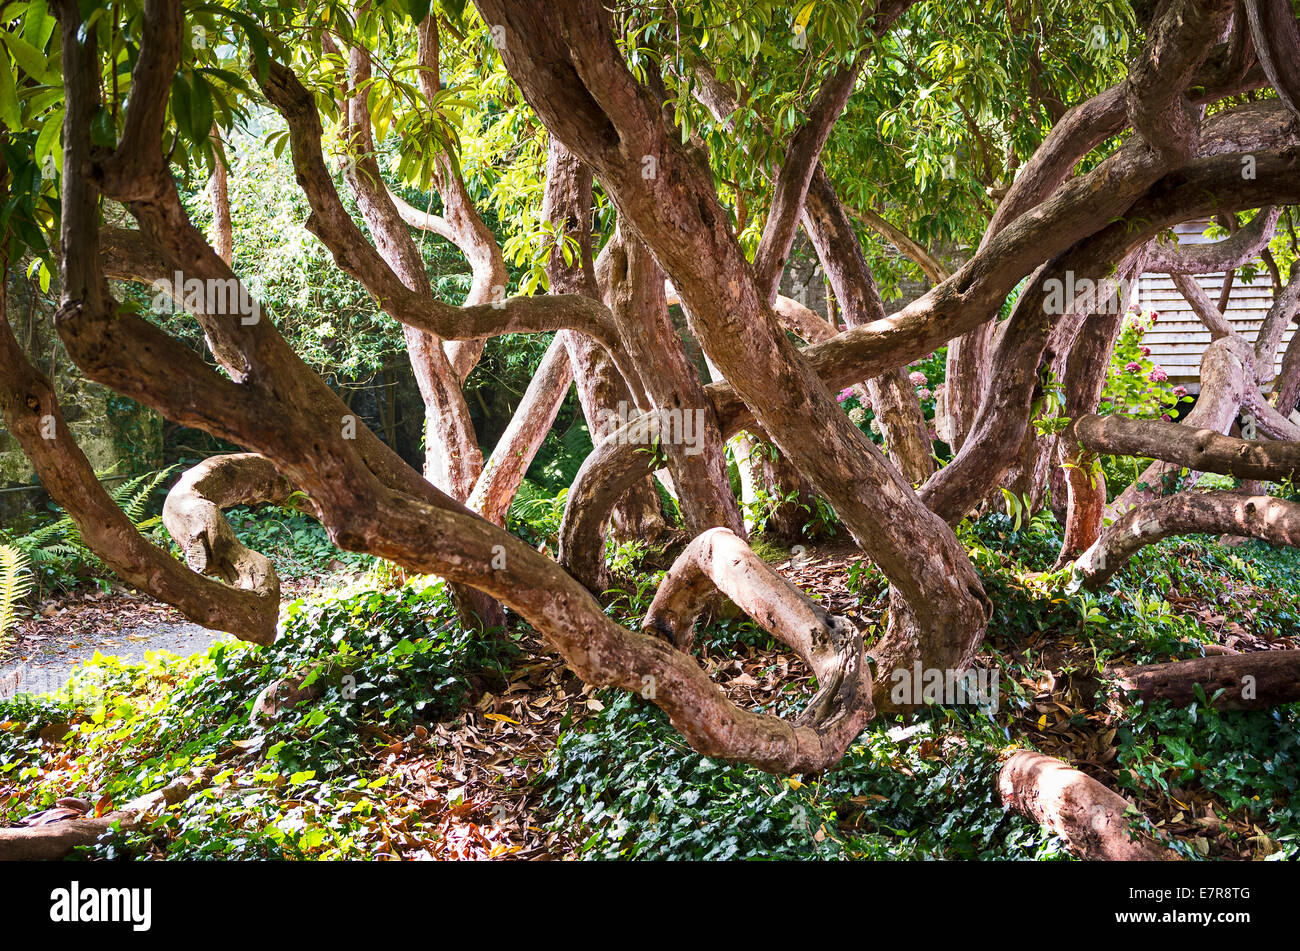 A tangle of rhododendron trunks growing in a Devon garden Stock Photo